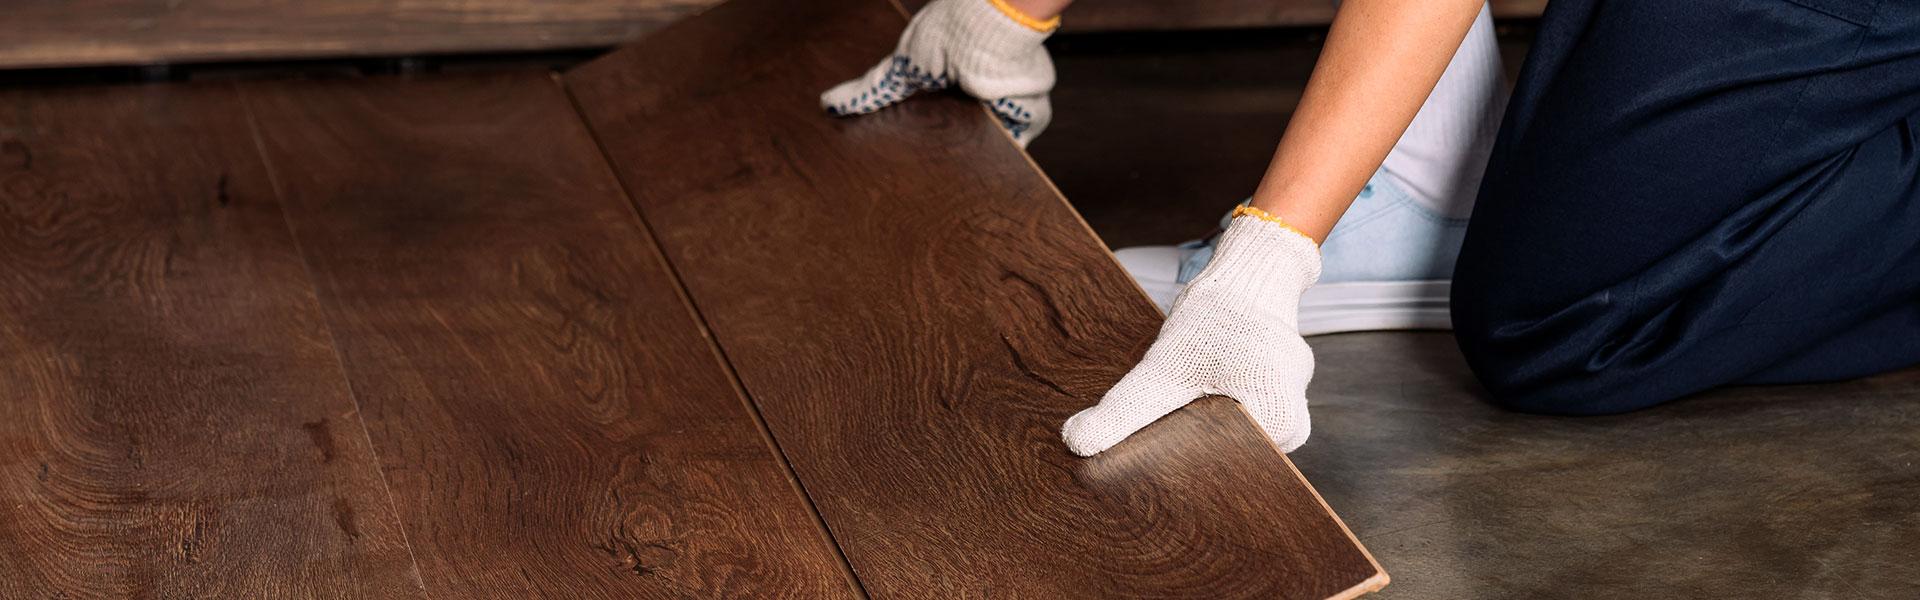 We offer professional installation services for all our flooring